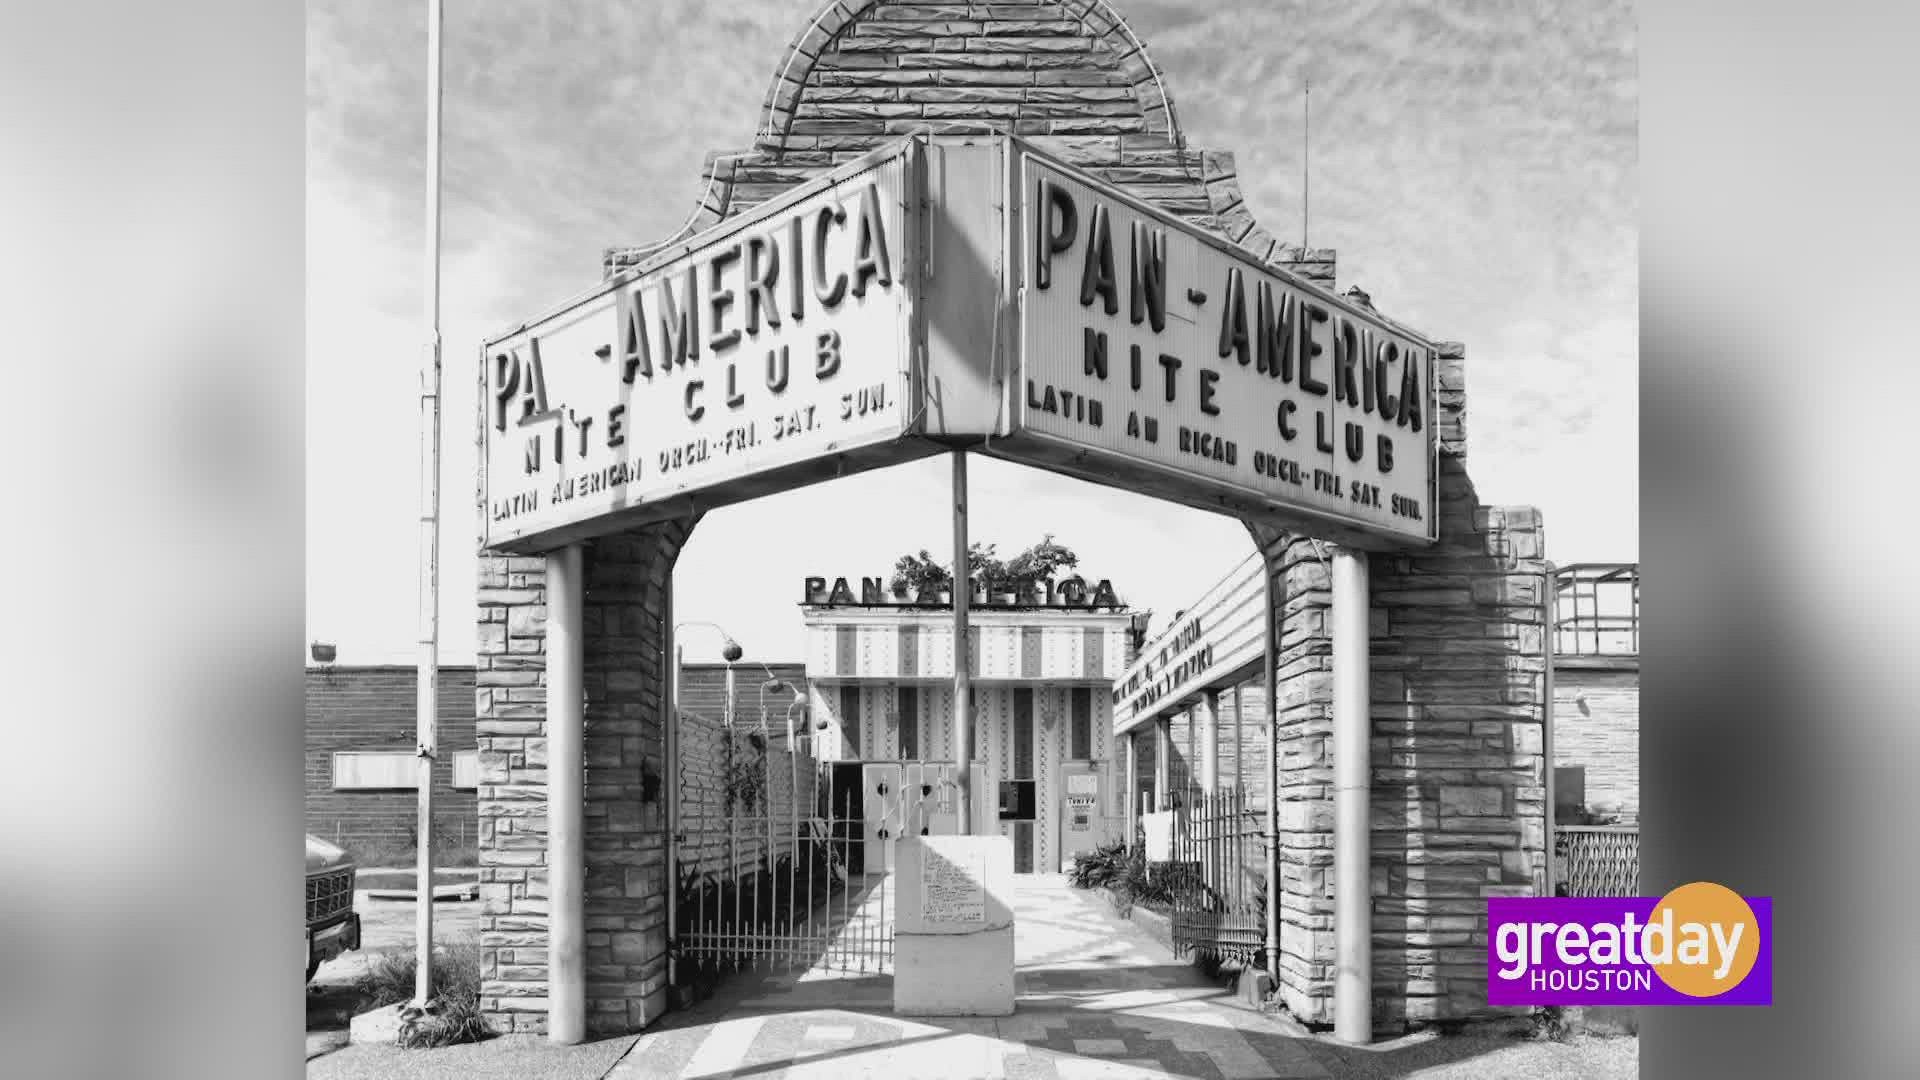 Take a look back at the rich history of the Pan America Ballroom and its place in Houston history.